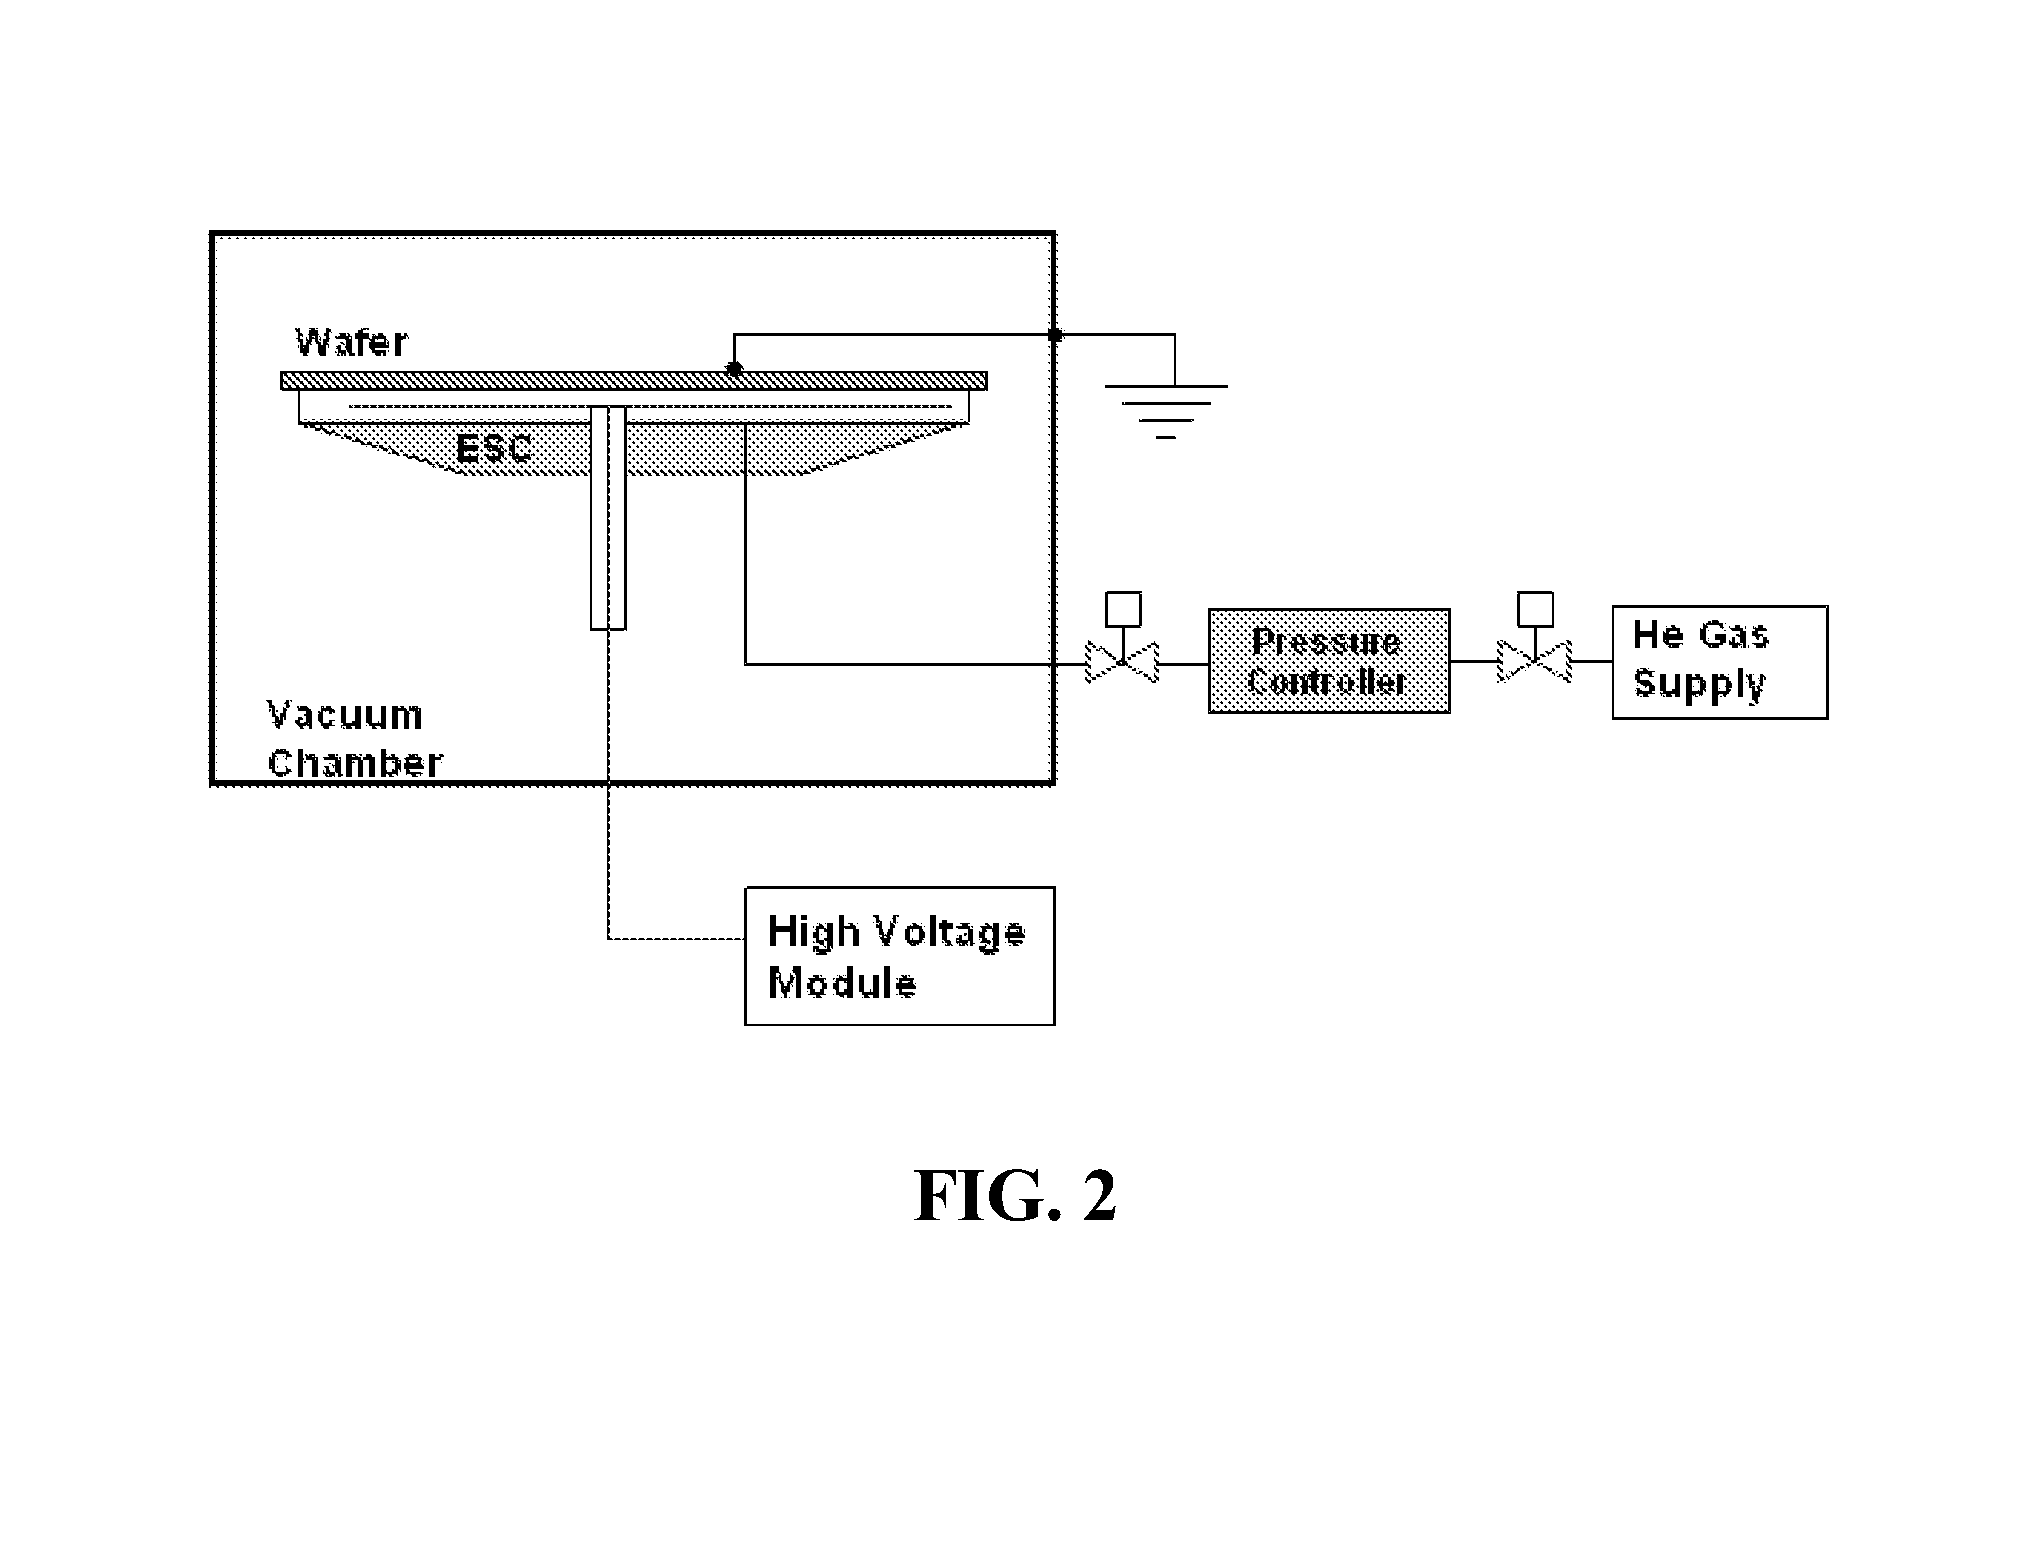 Substrate supports for semiconductor applications